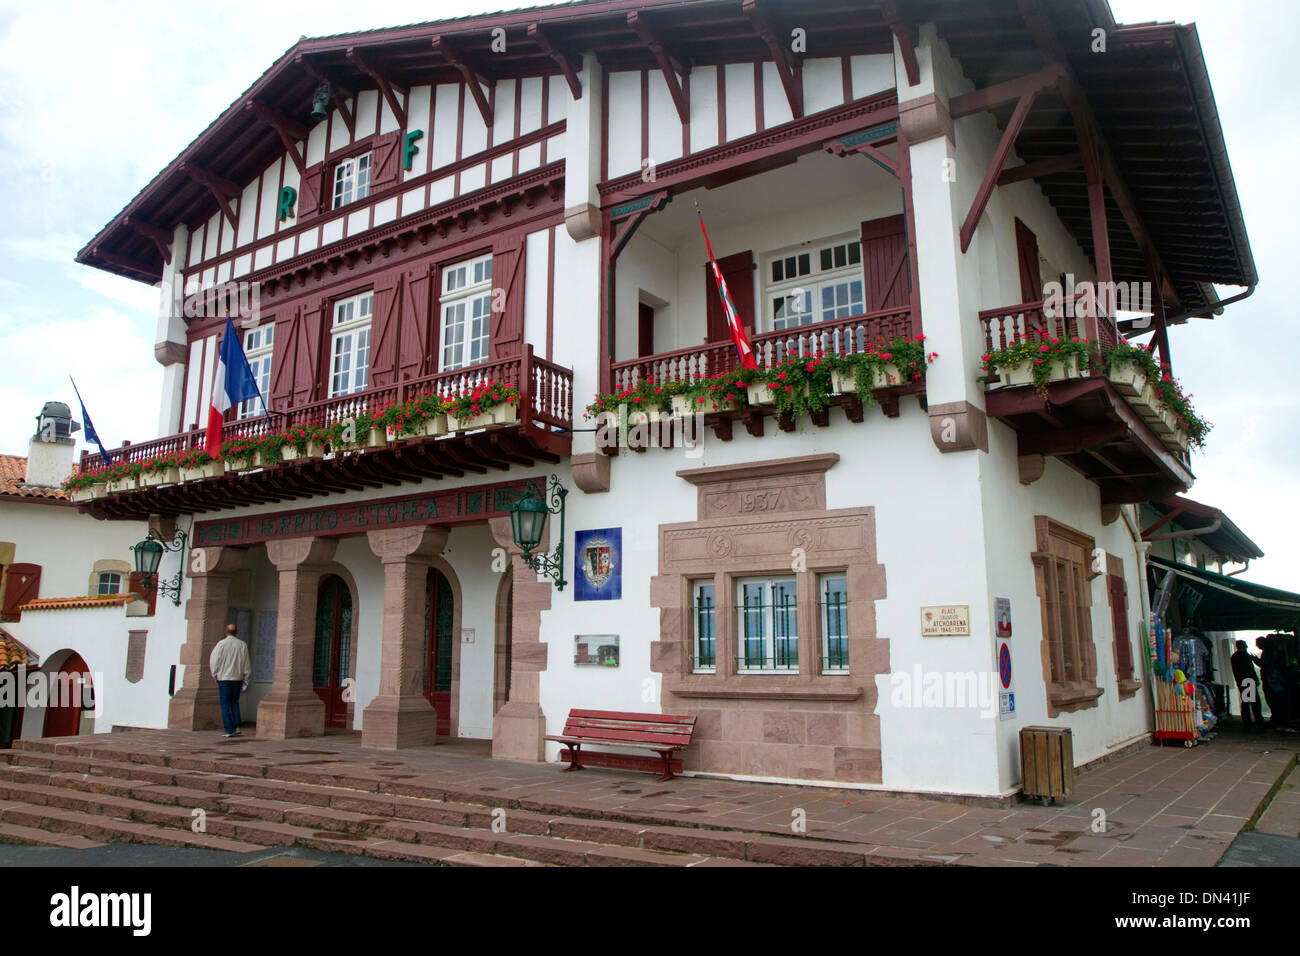 Basque building at Bidart in the Basque province of Labourd, southwestern France. Stock Photo